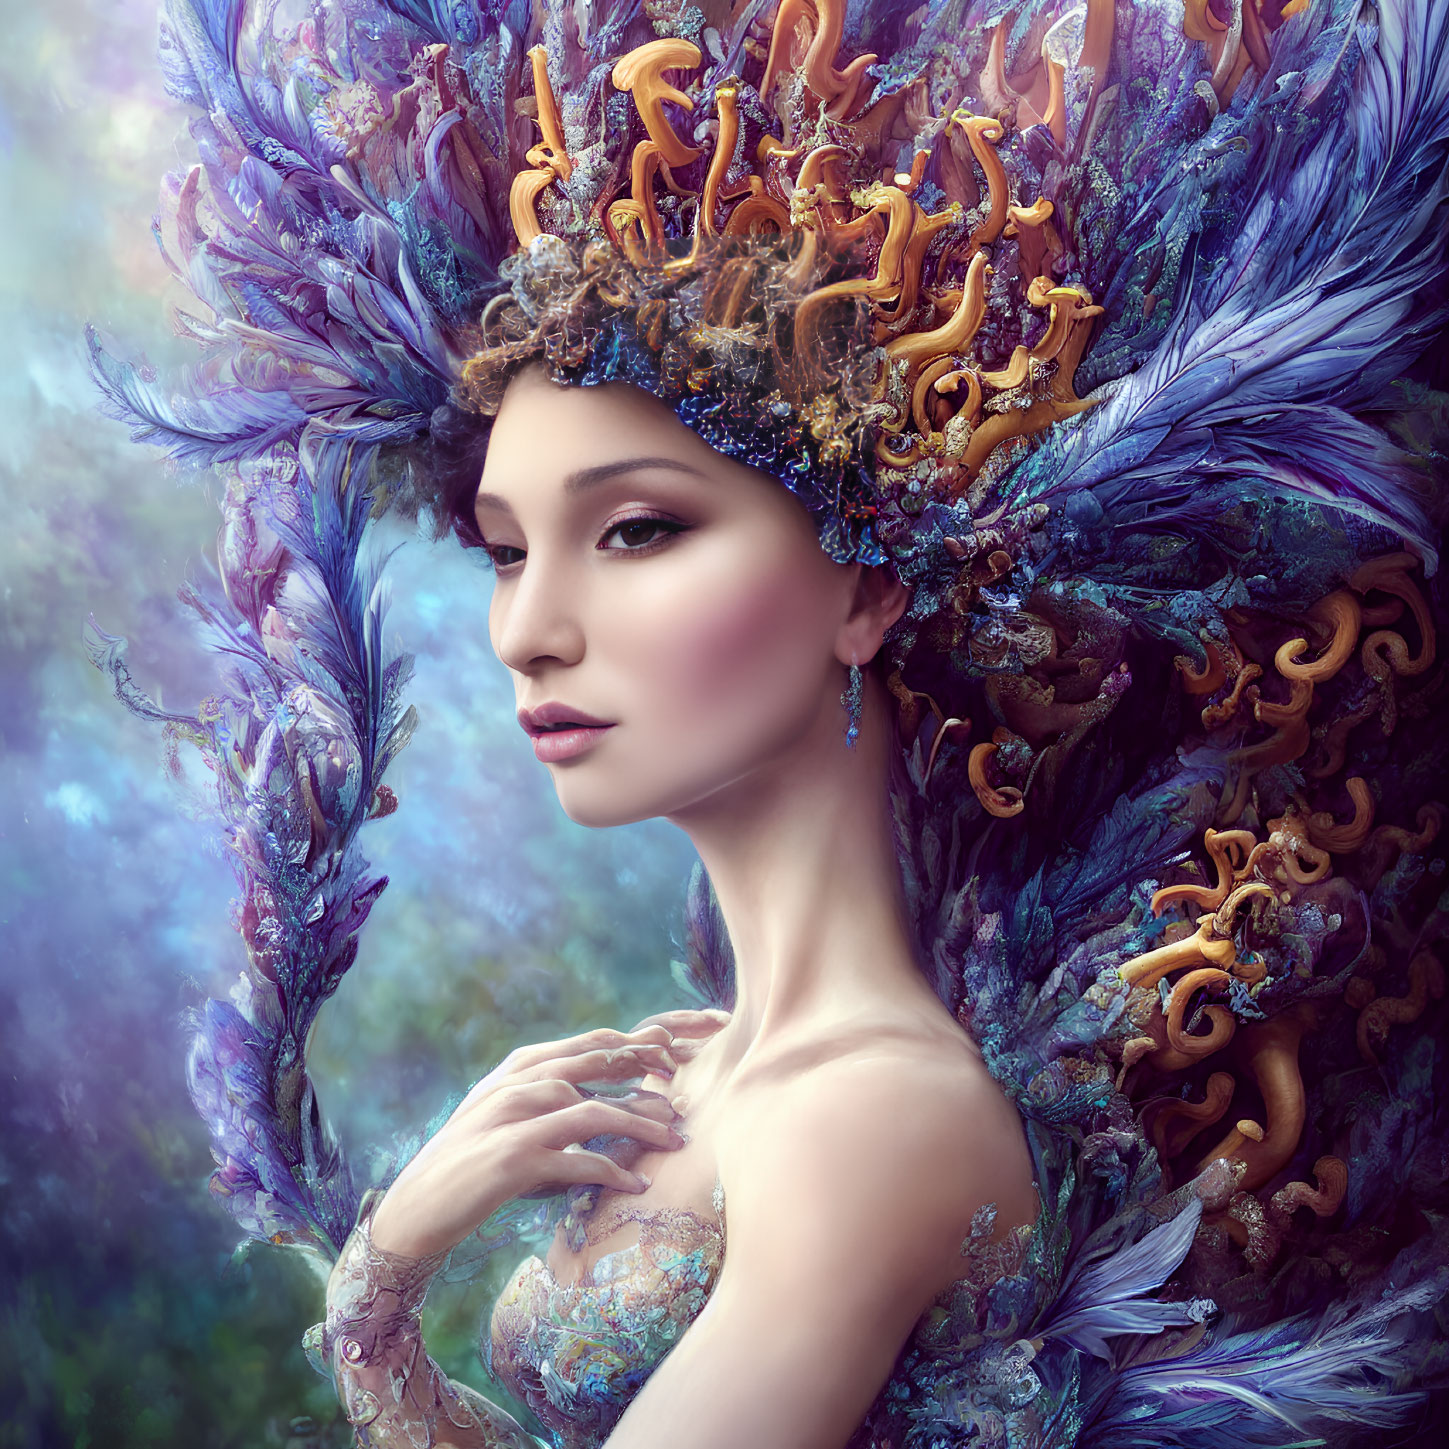 Intricate vibrant headpiece on serene woman against blue background